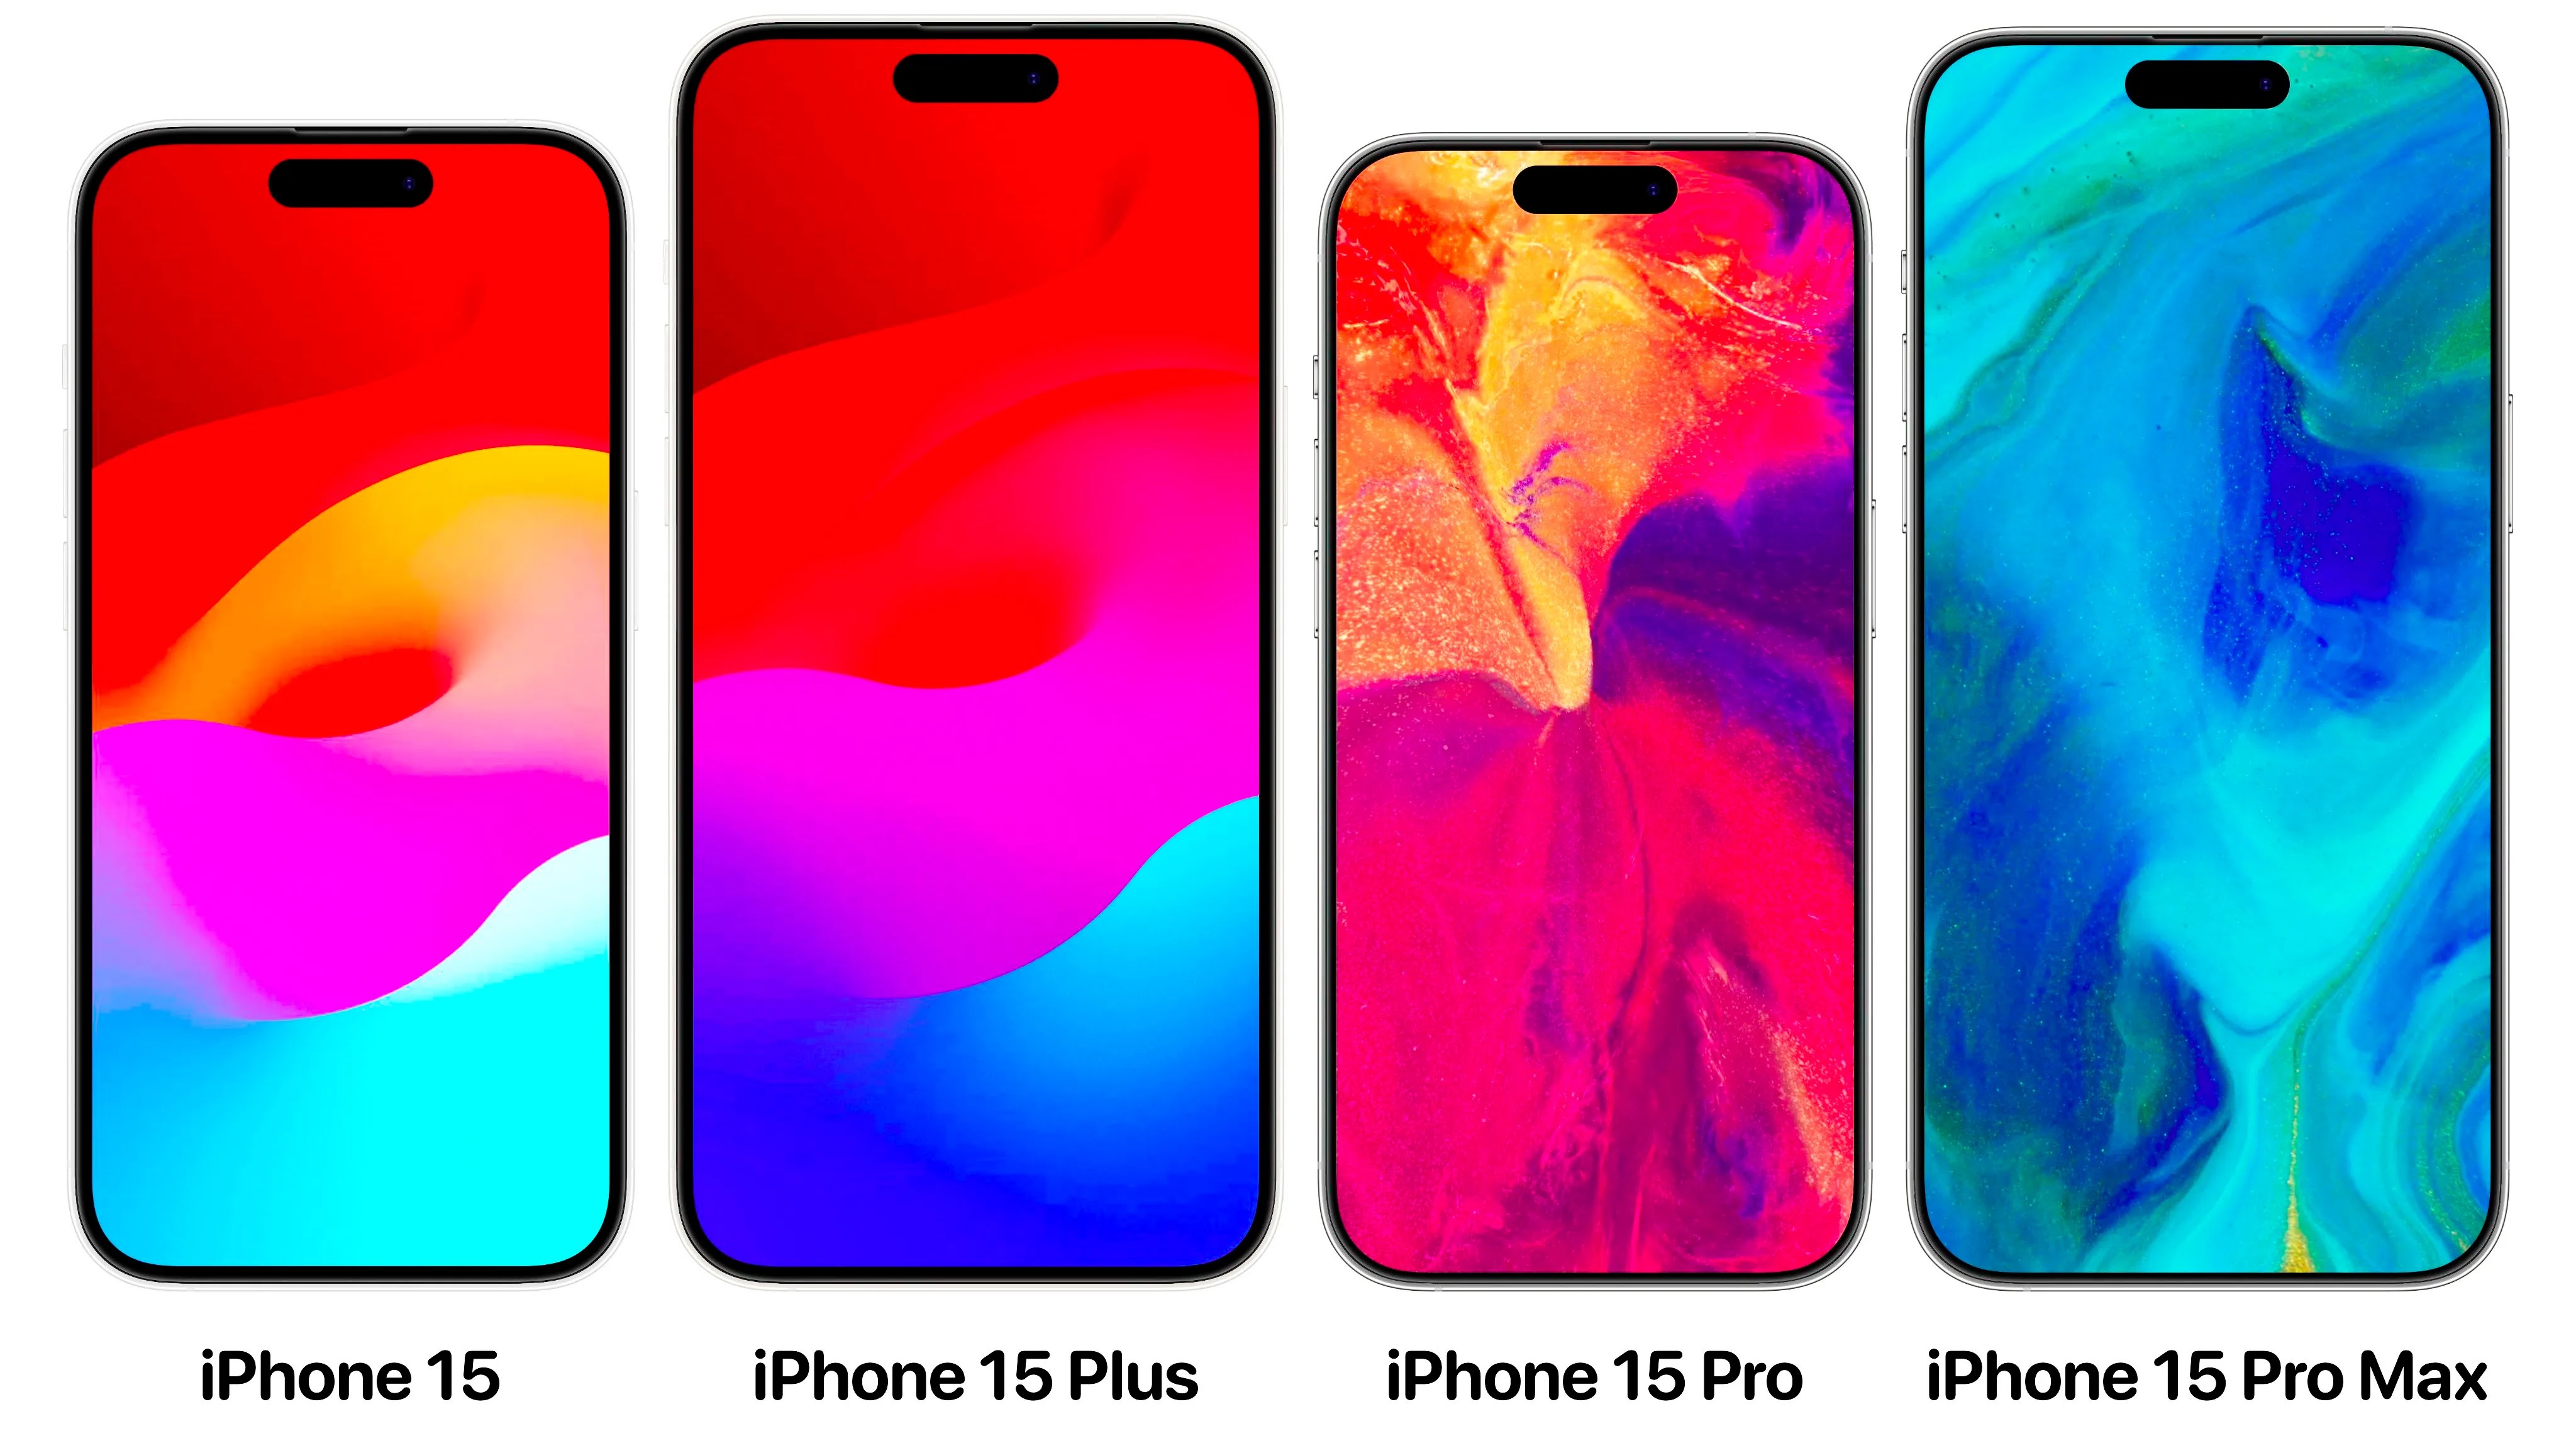 Apple unveils iPhone 15 Pro and iPhone 15 Pro Max - Apple (LV)